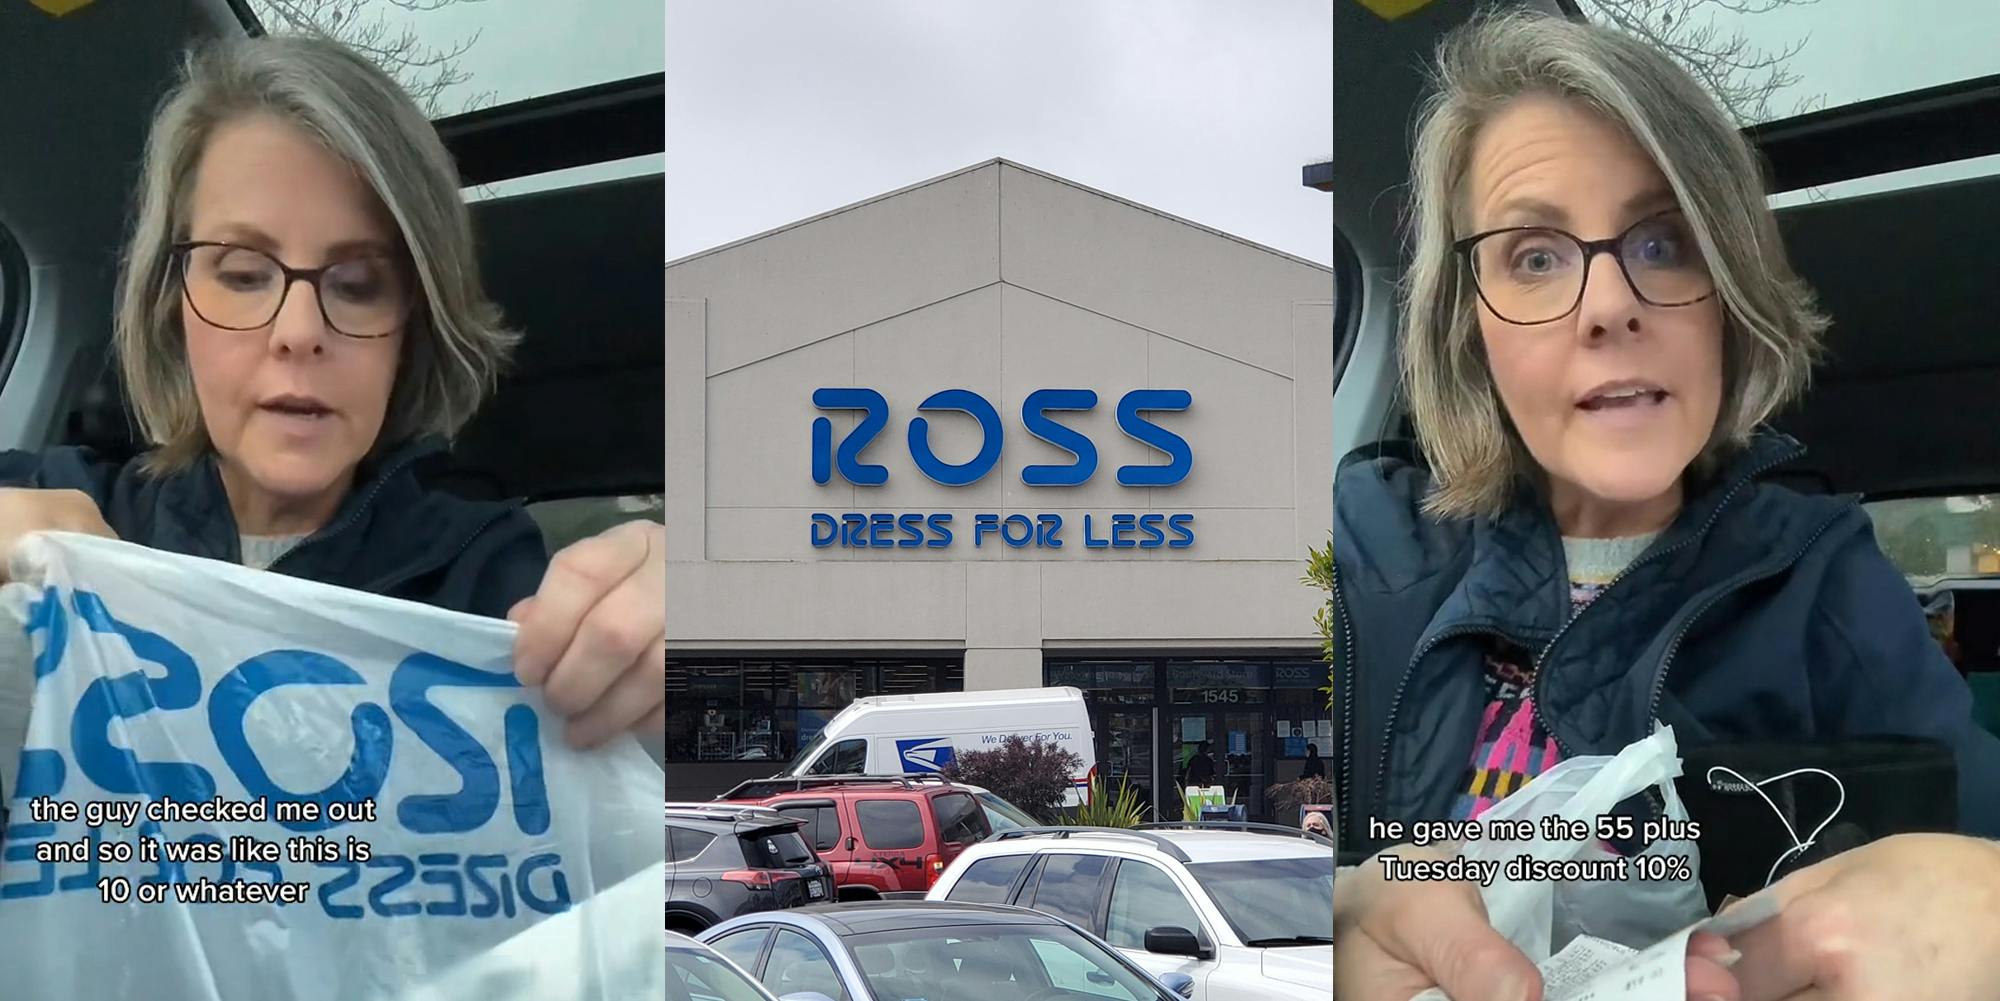 woman speaking in car holding Ross Dress For Less bag caption "the guy checked me out and so it was like this is 10 or whatever" (l) Ross Dress Fir Less sign on building with parking lot (c) woman speaking in car holing bag caption "he gave me the 55 plus Tuesday discount 10%" (r)